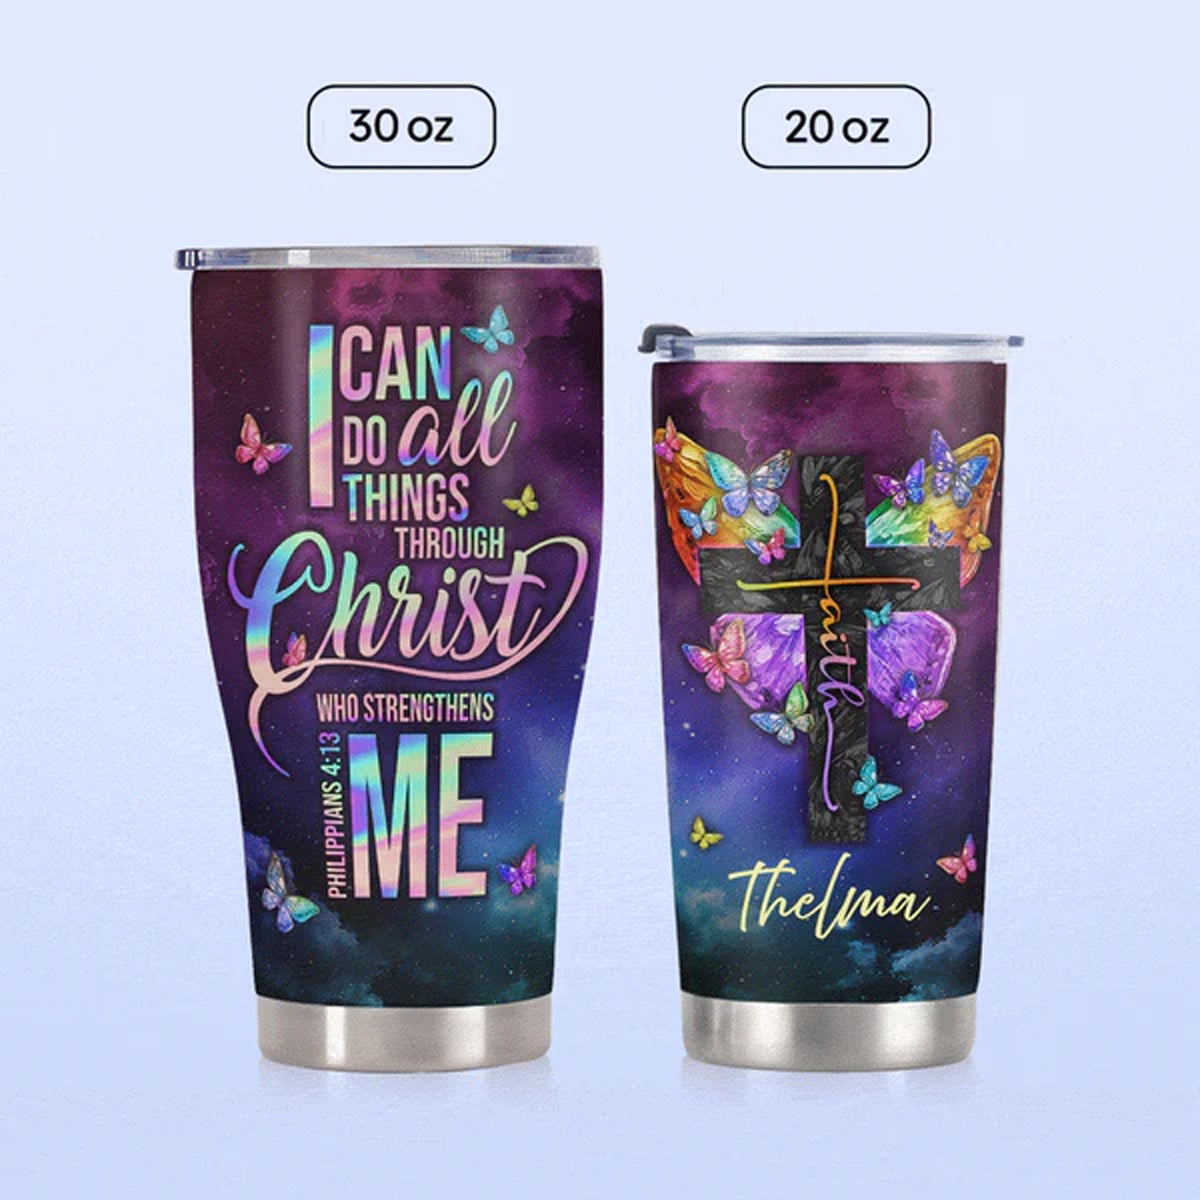 Christianartbag Drinkware, I Can Do All Things Through Christ Philippians 4:13, Personalized Mug, Stainless Steel Tumbler, Christmas Gift, CABTB01270723. - Christian Art Bag